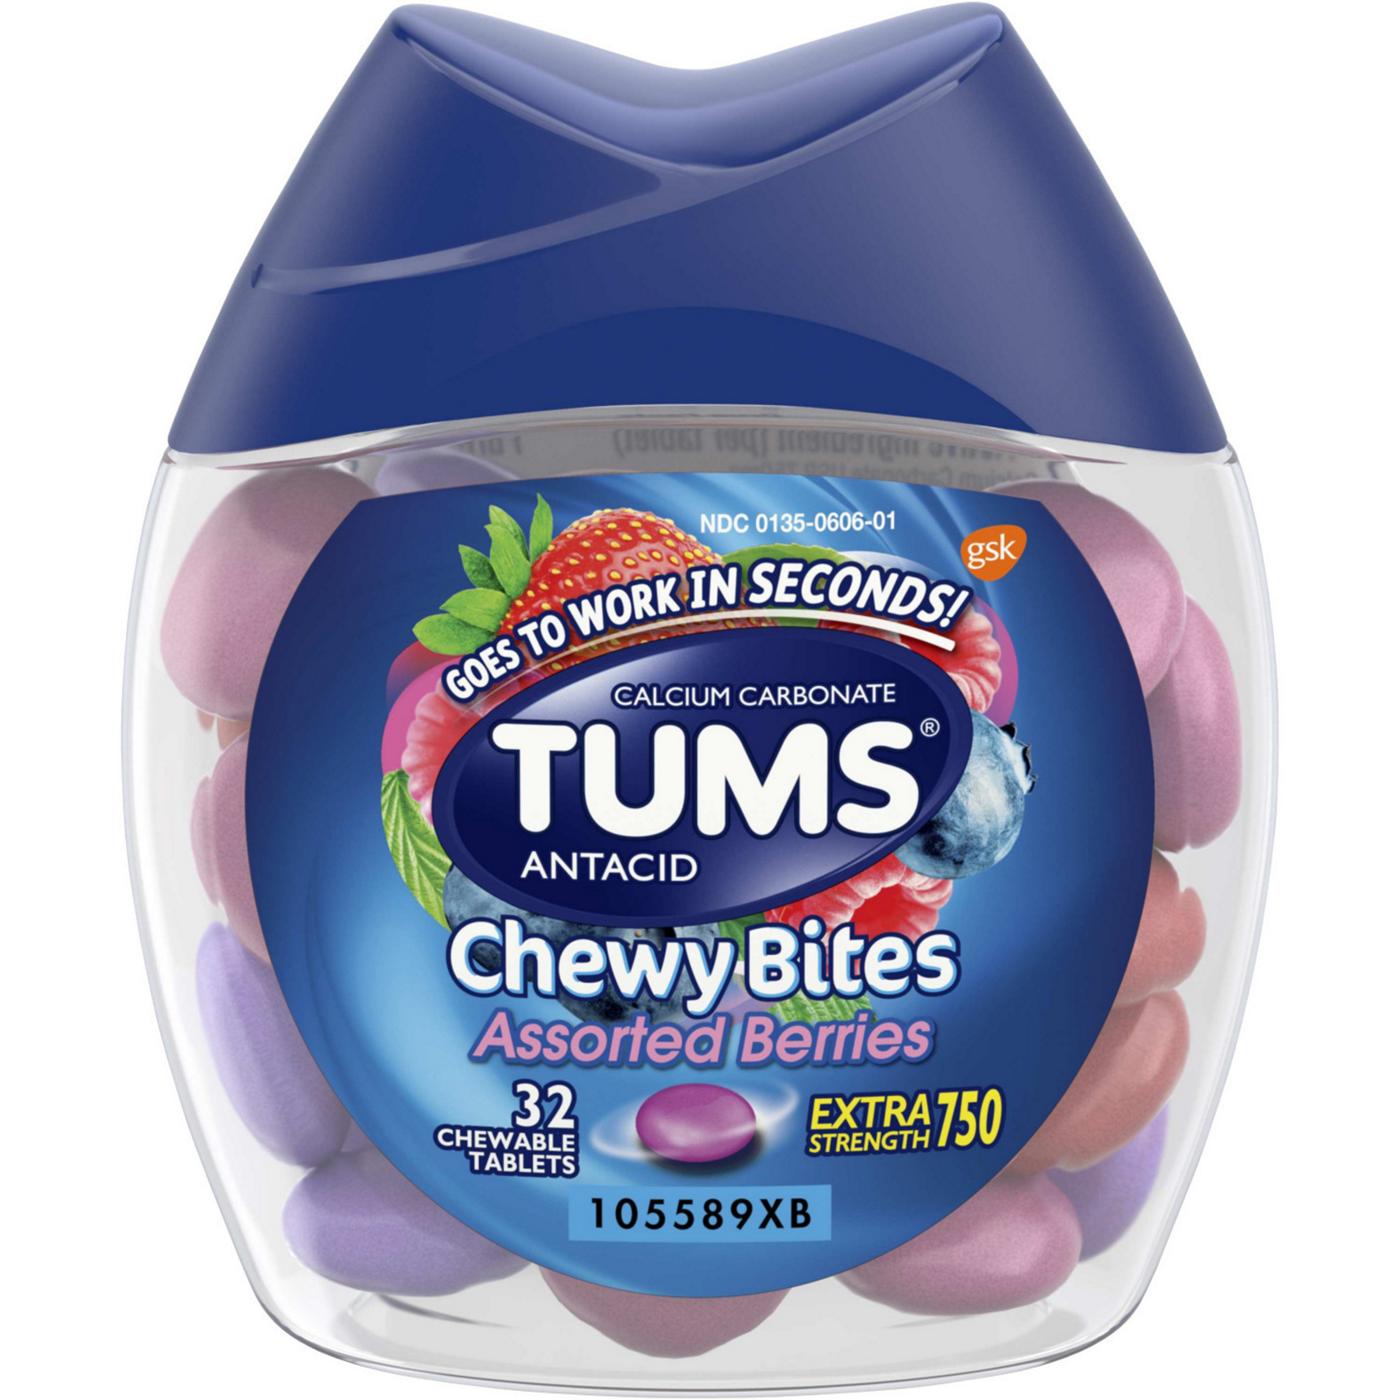 Tums Chewy Bites Assorted Berries Antacid Tablets; image 1 of 8